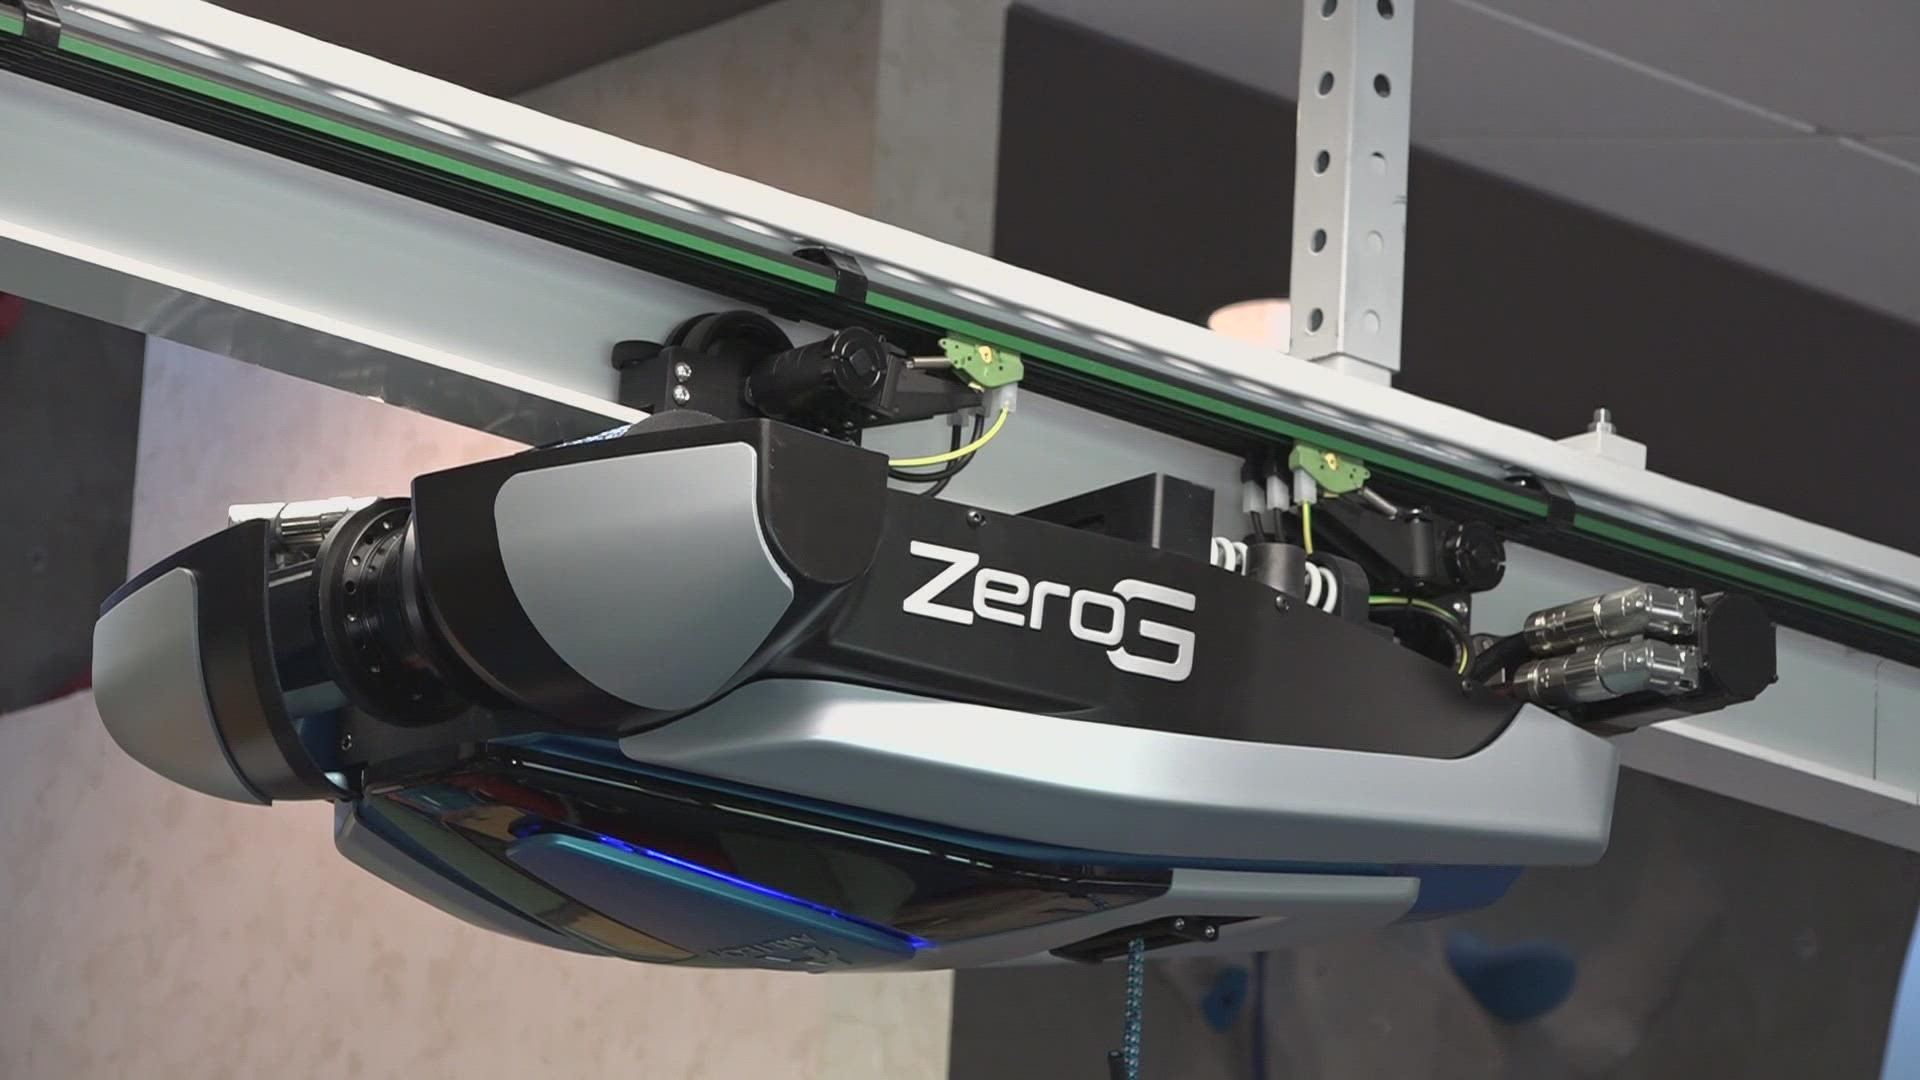 A new state-of-the-art robot is helping patients with disabilities learn how to walk in the Valley. Here is a closer look at the "Zero-G" tech.